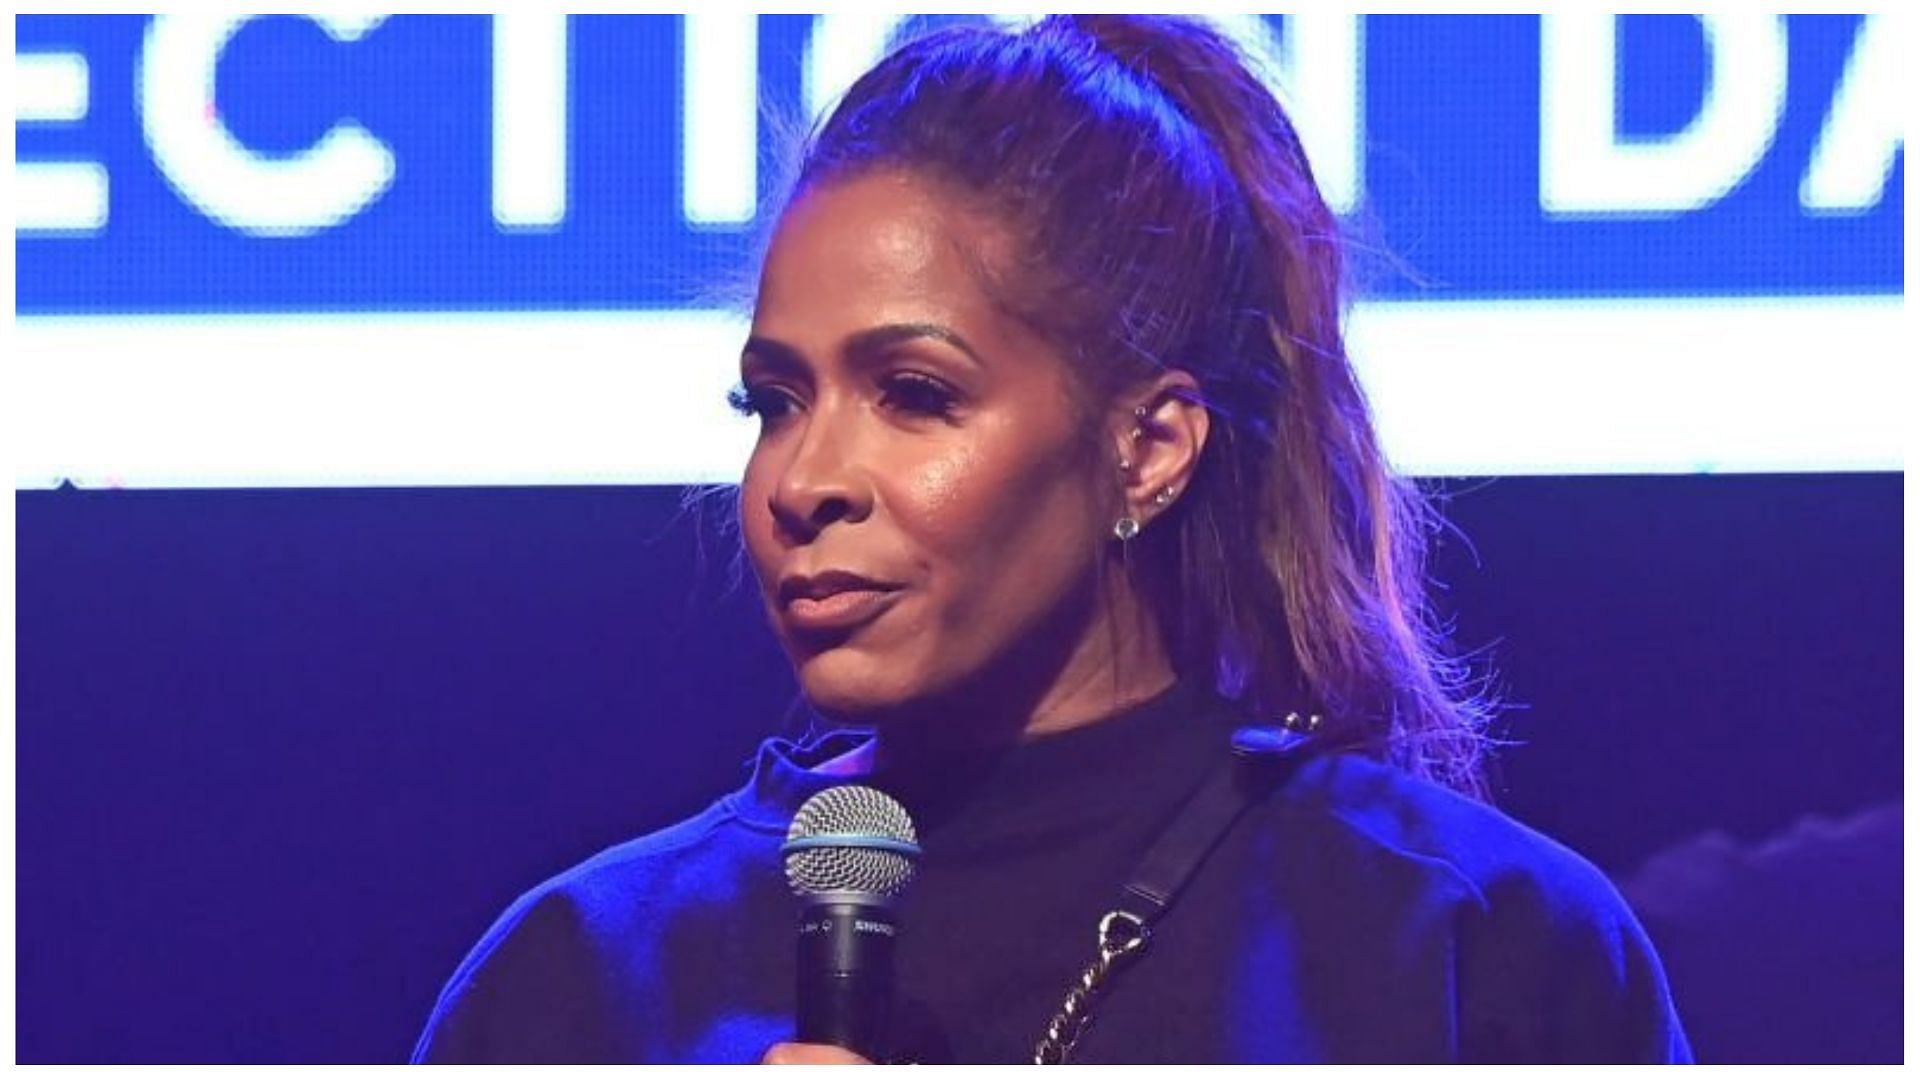 Shere&eacute; Whitfield is now romantically linked to someone else (Image via Paras Griffin/Getty Images)